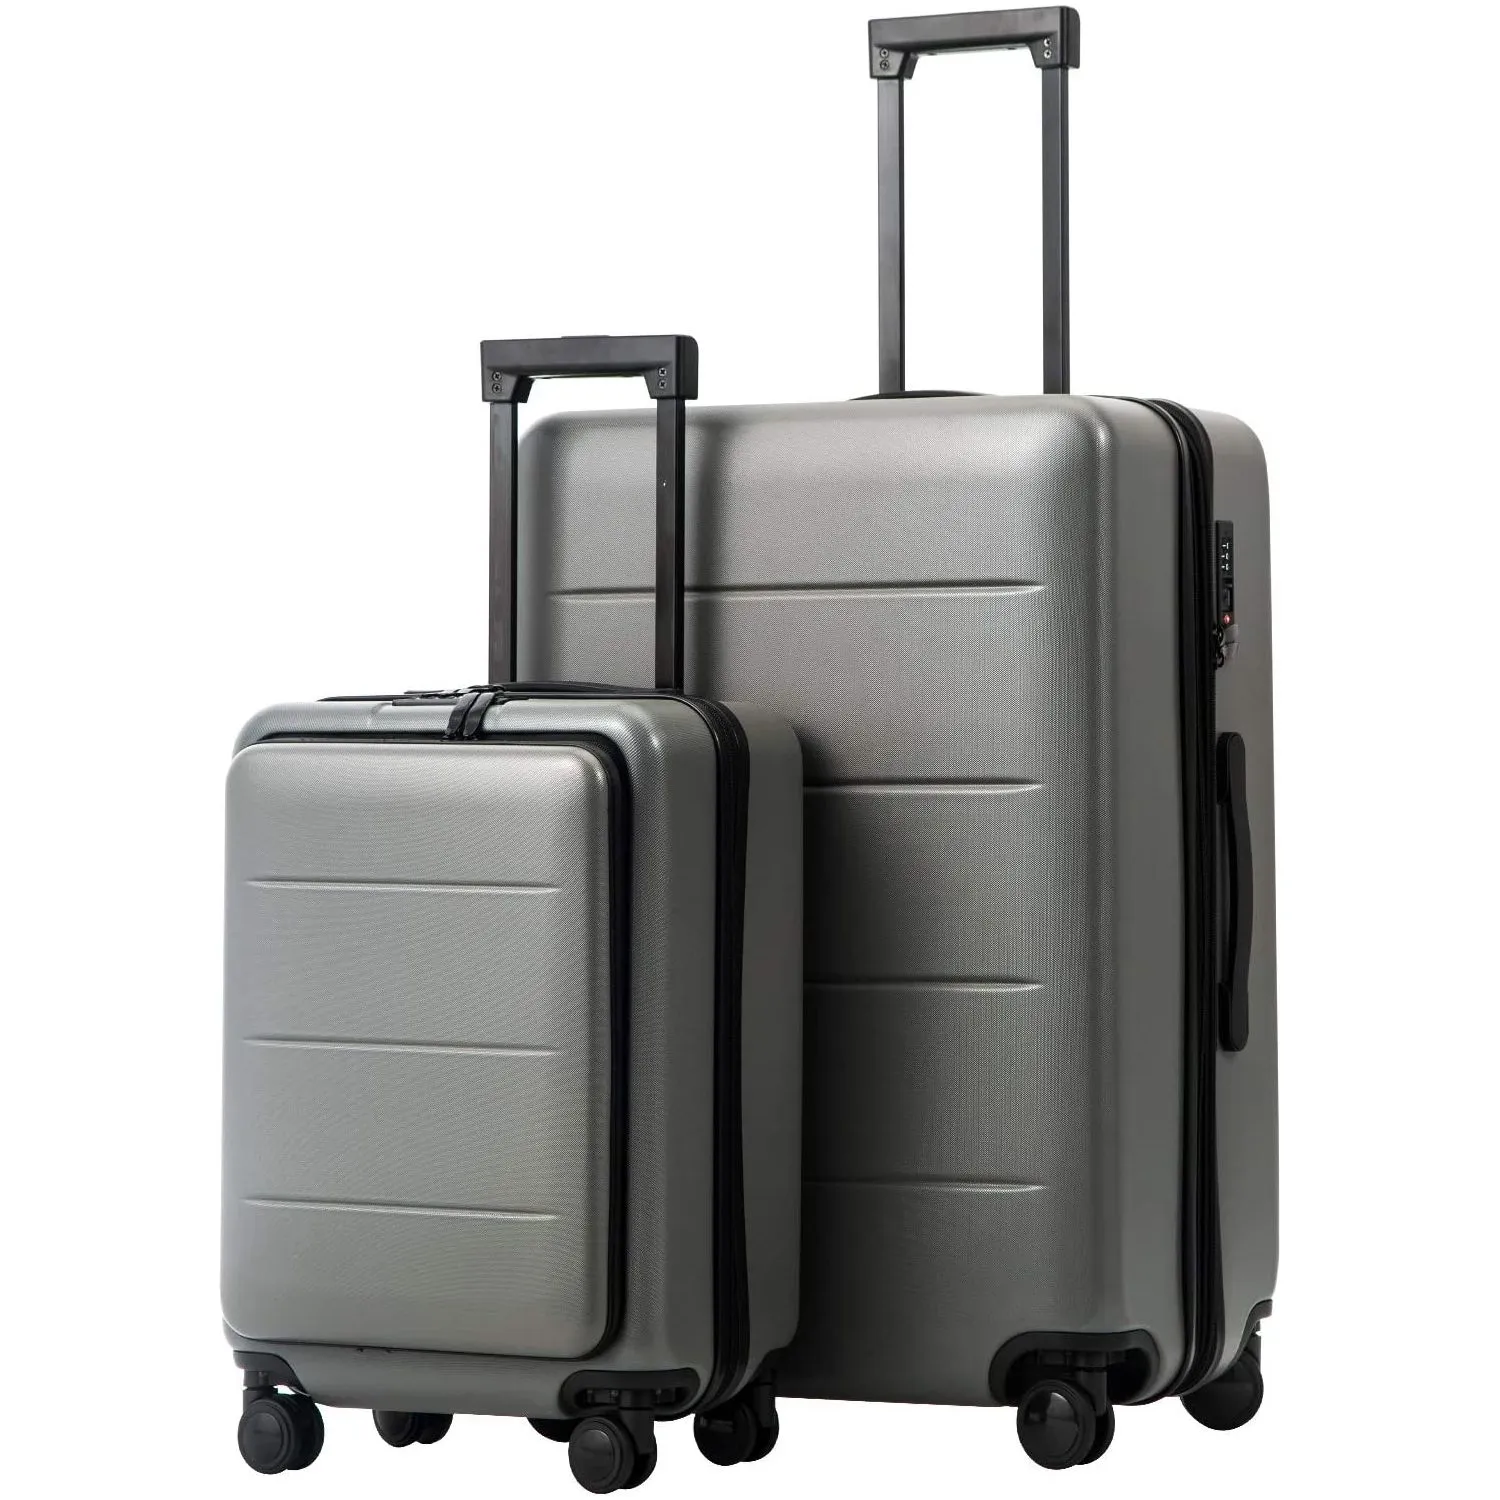 Luggage Suitcase Piece Set Carry On ABS+PC Spinner Trolley with pocket Compartment Weekend Bag